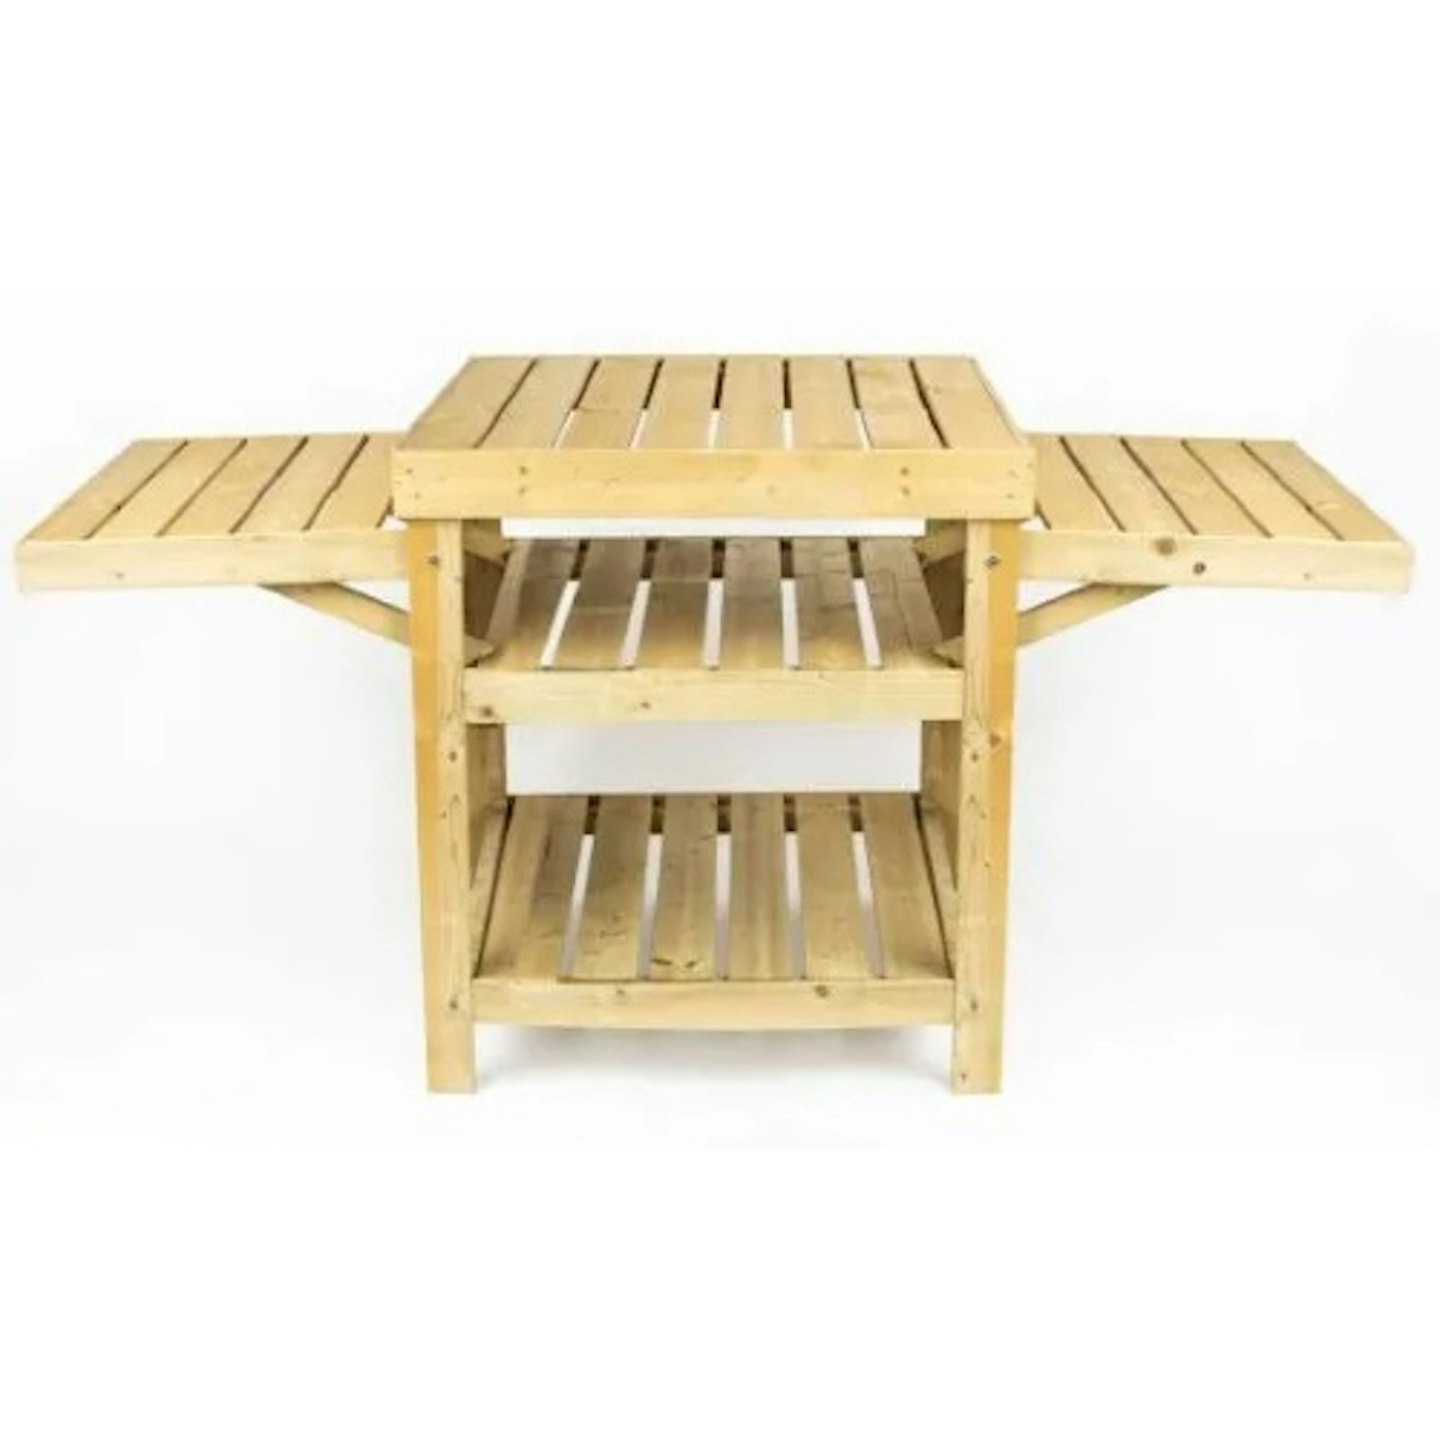 Robert Dyas pizza oven table 